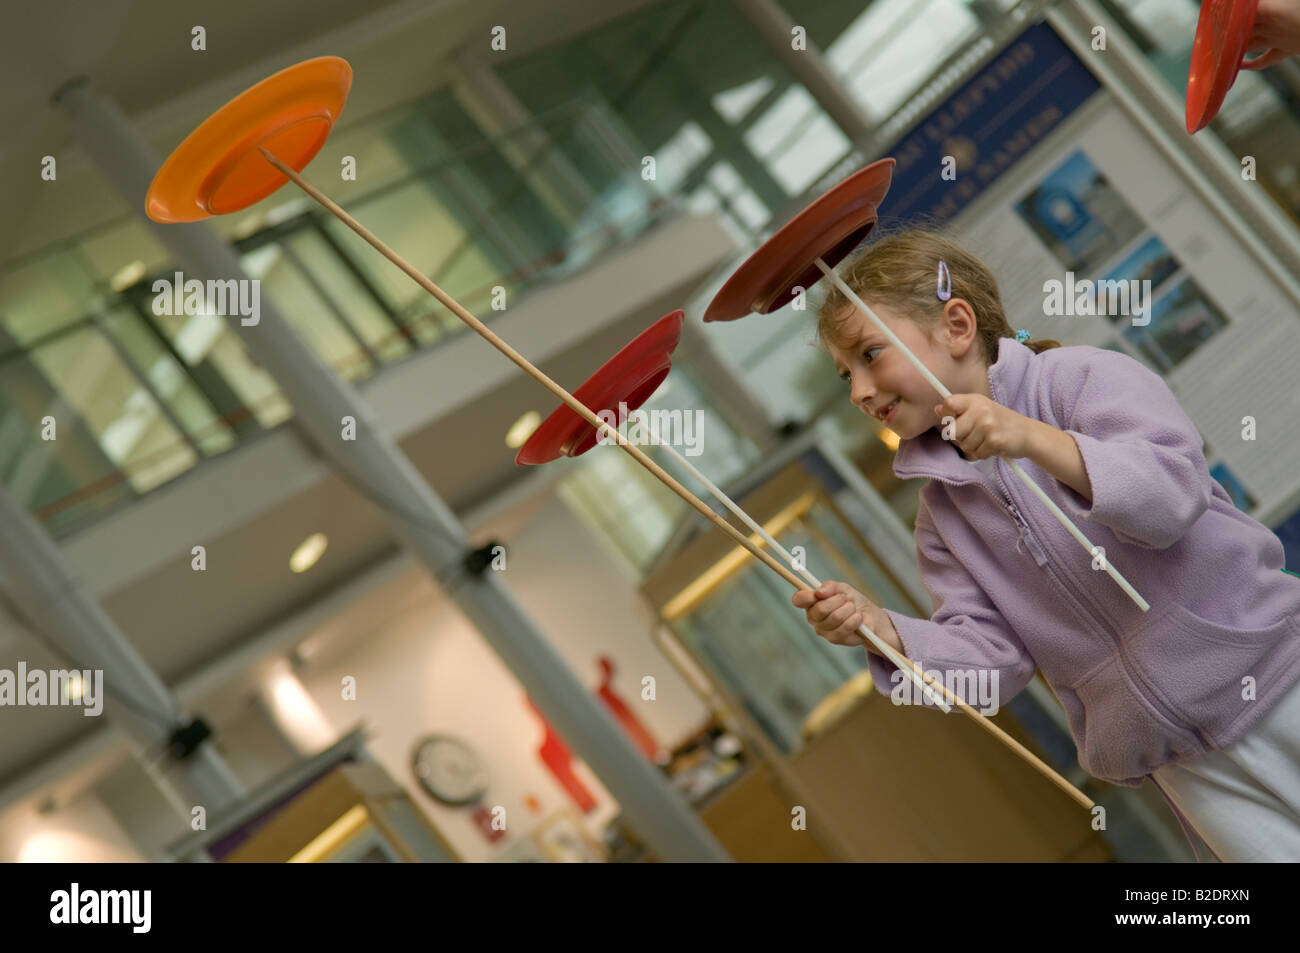 young girl spinning plates on sticks circus skills workshop National Maritime Museum of Wales Swansea UK Stock Photo